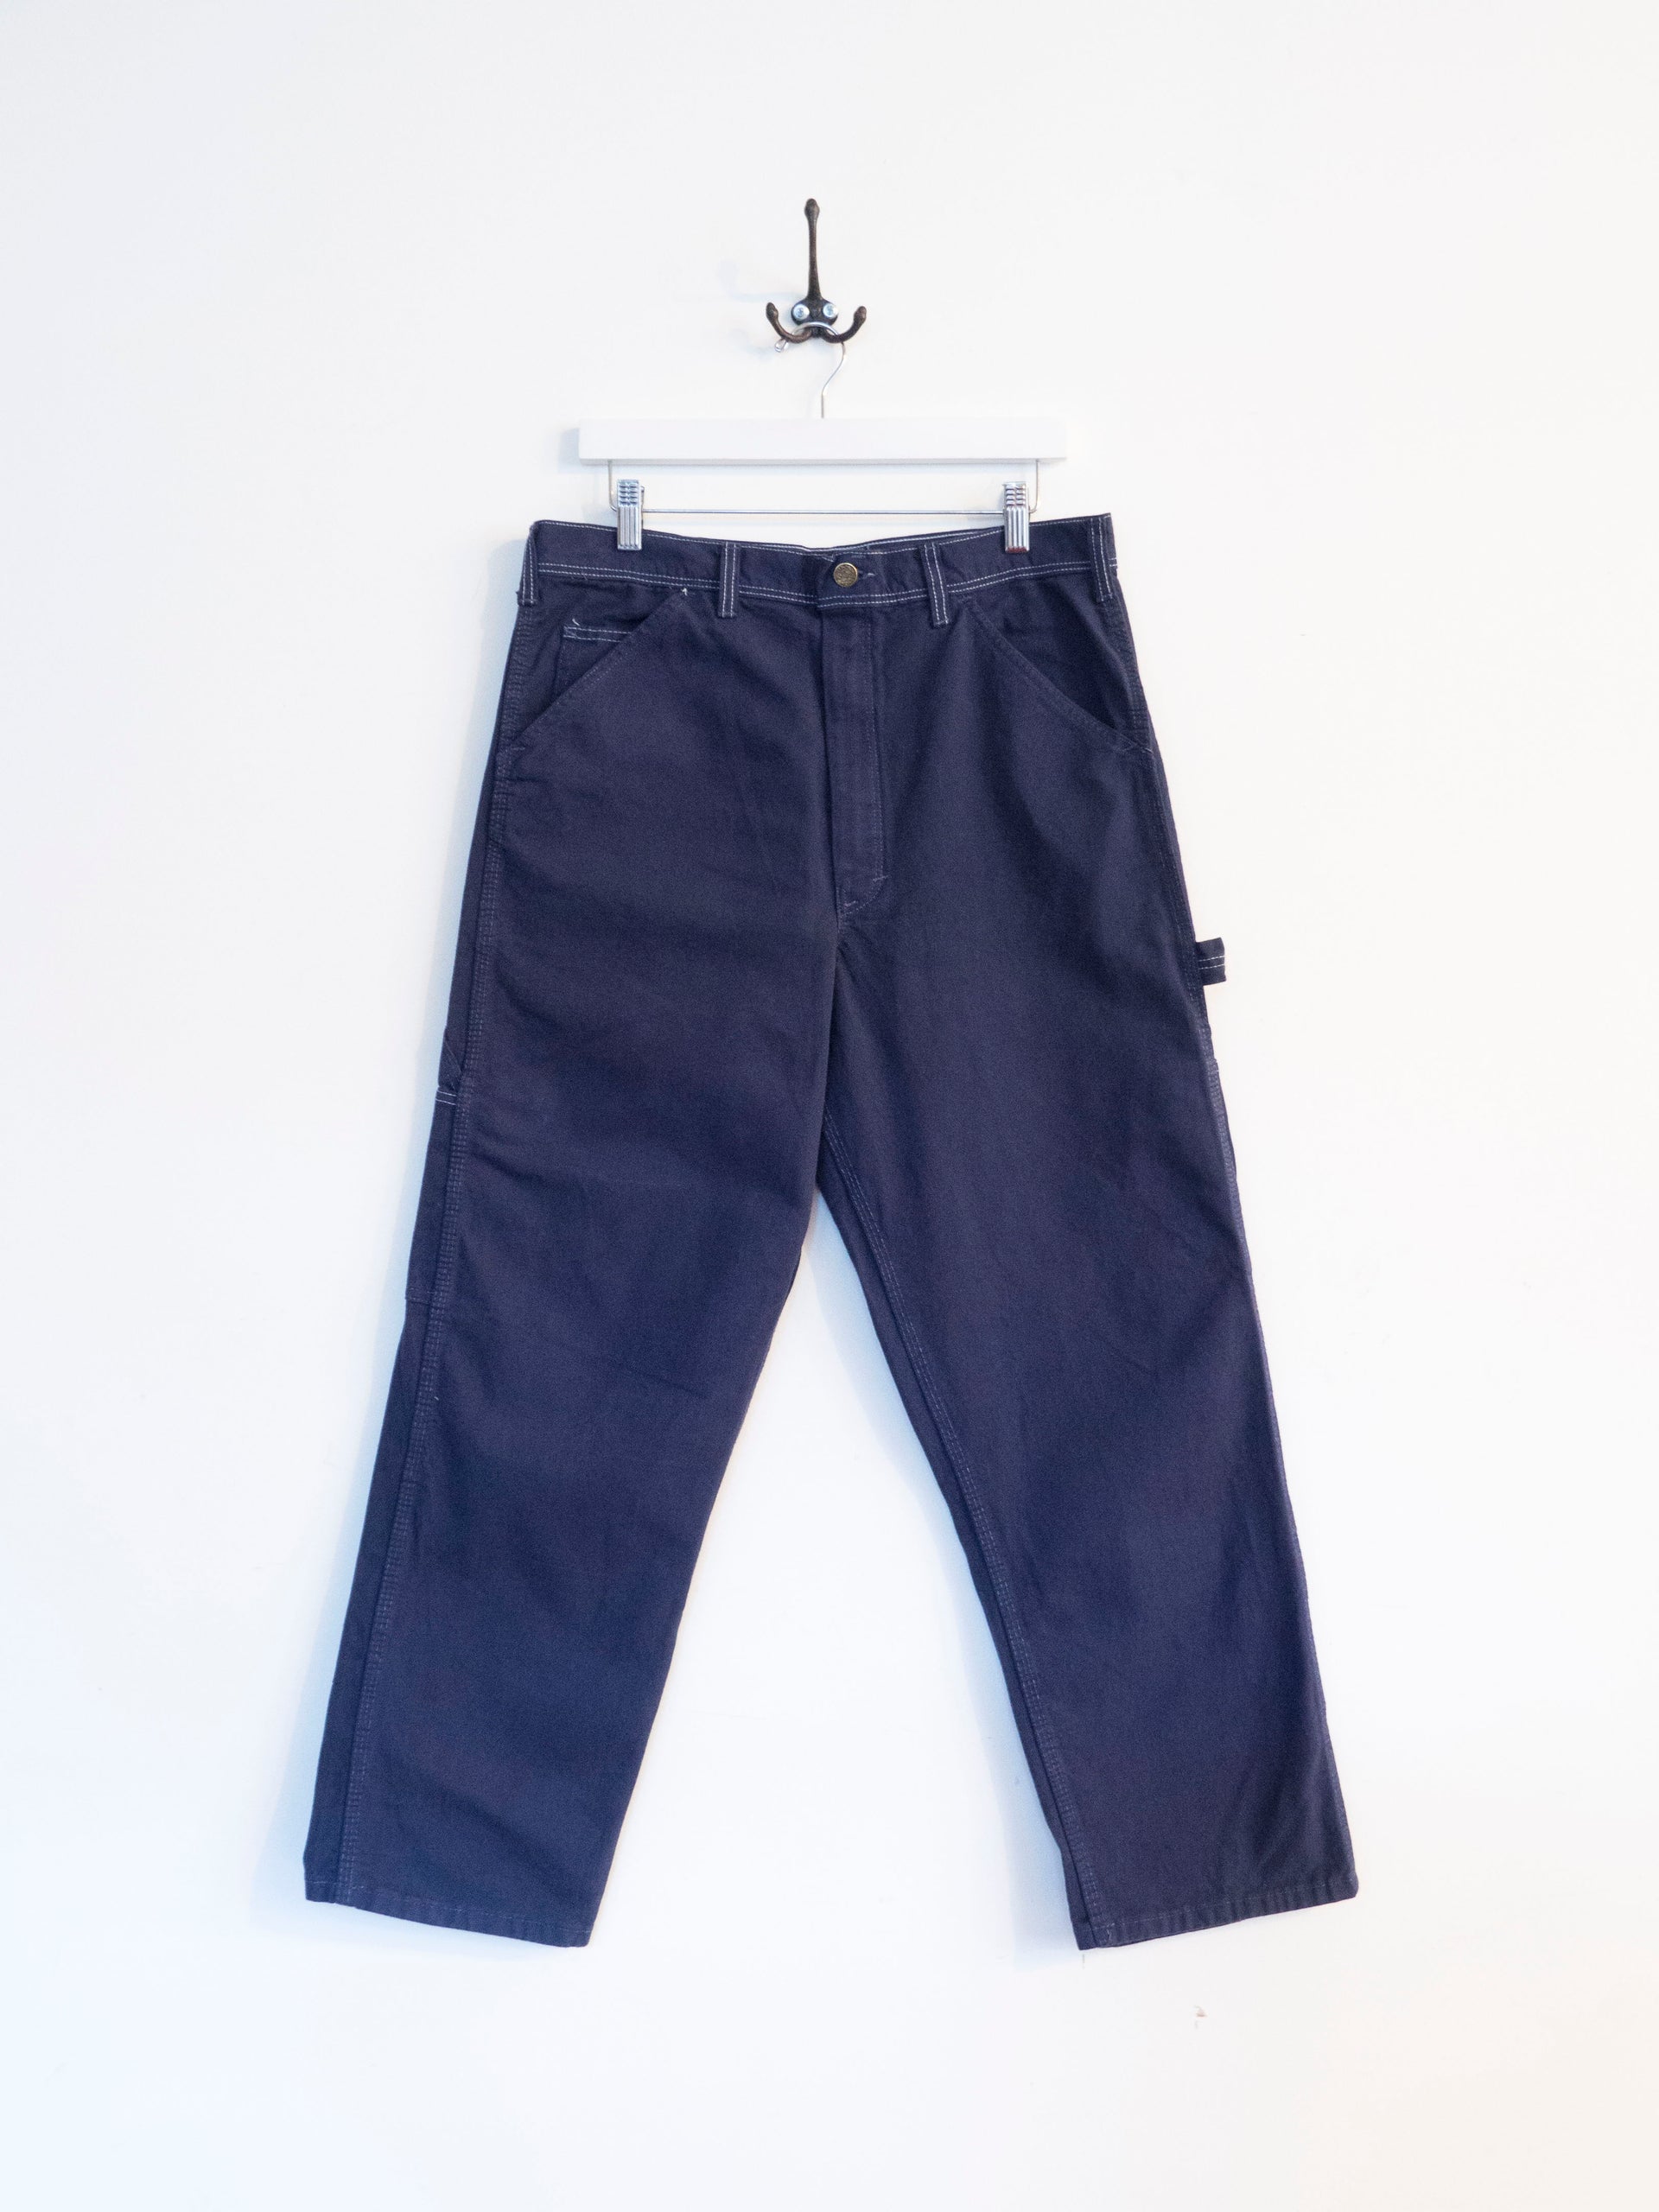 Indigo - Stan Ray Painter Pants – THE CONSISTENCY PROJECT